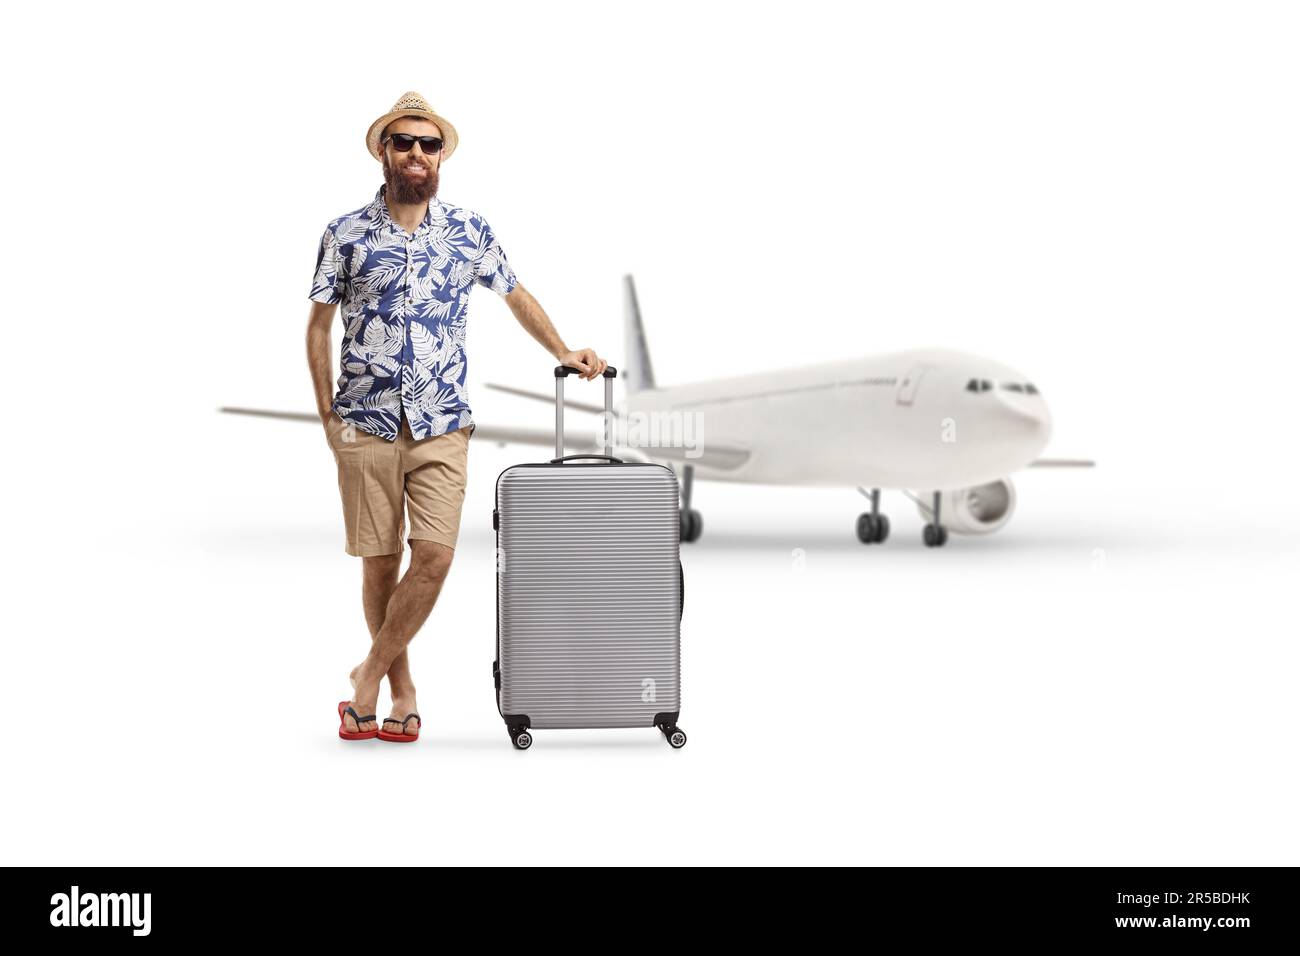 Full length portrait of a tourist posing with a suitcase in front of an aircraft isolated on white background Stock Photo